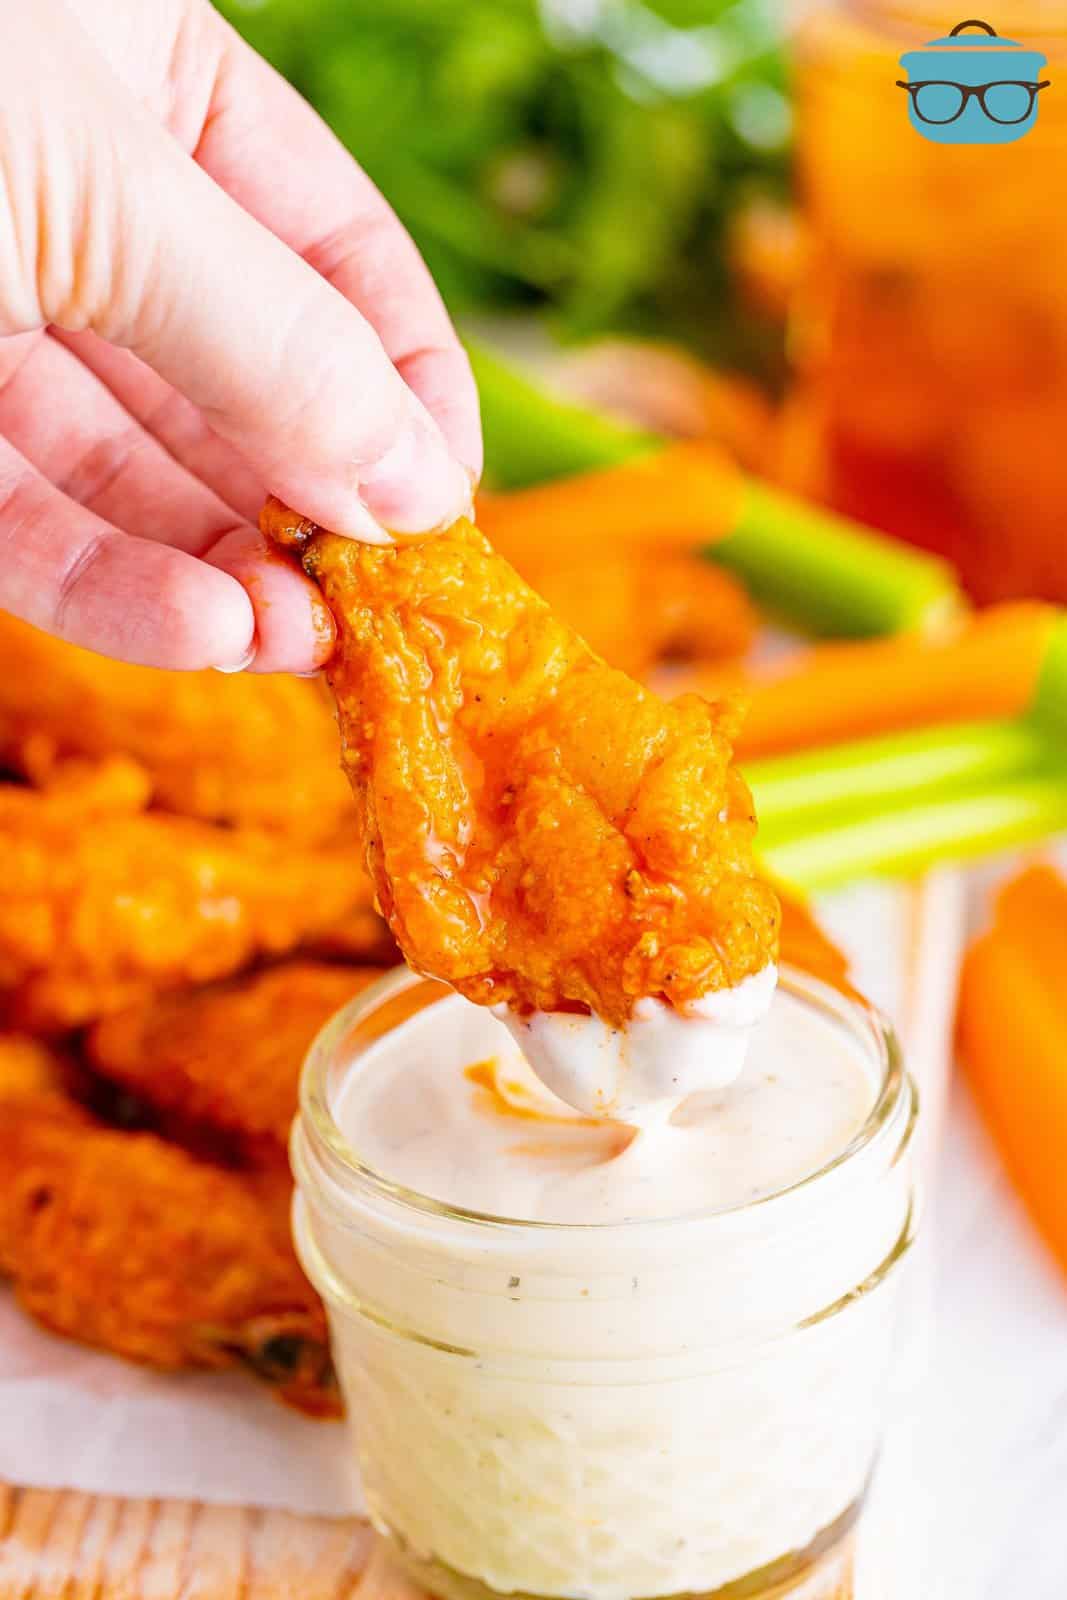 A hand dipping a crispy chicken wing in sauce.